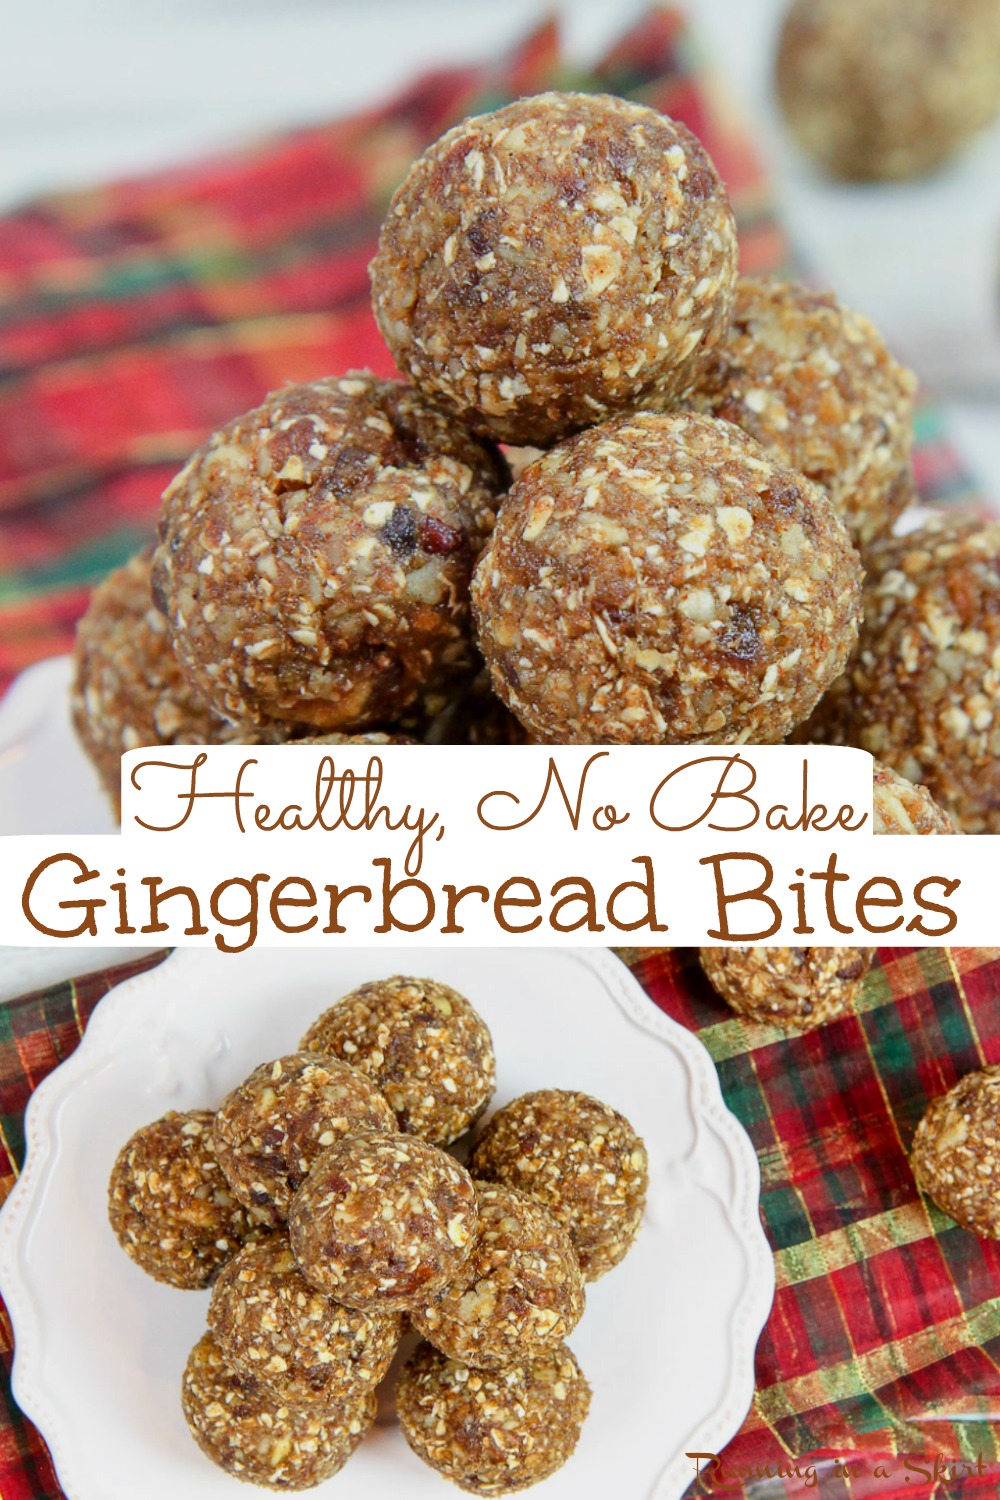 Healthy No Bake Gingerbread Bites recipe - An easy idea for Vegan Christmas treats that easy to make and tastes like cookies! This idea for Clean Eating desserts is filled with dates, oats, and gingerbread spices like cinnamon, nutmeg and cloves. The best healthy gingerbread recipe! Added sugar free and vegetarian! / Running in a Skirt #cleaneating #cleaneatingchristmas #vegan #veganchristmas #healthyliving #nobakedessert via @juliewunder